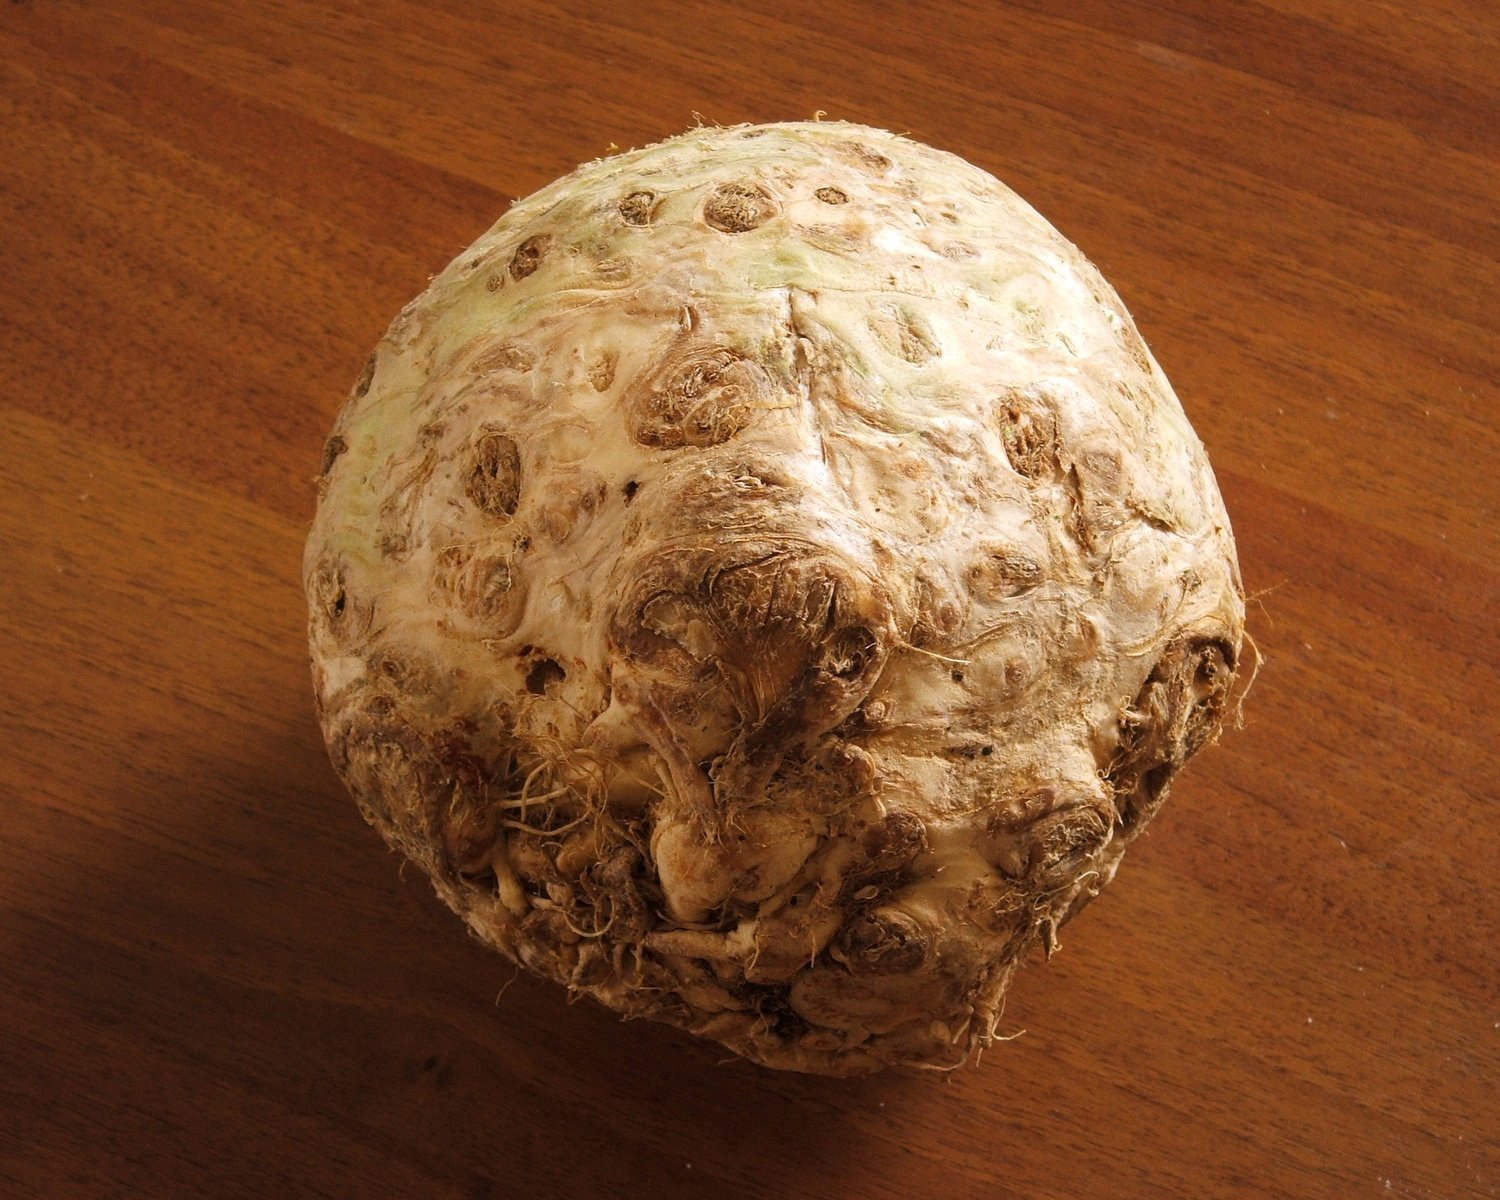 an old, rotten vegetable that is on a table